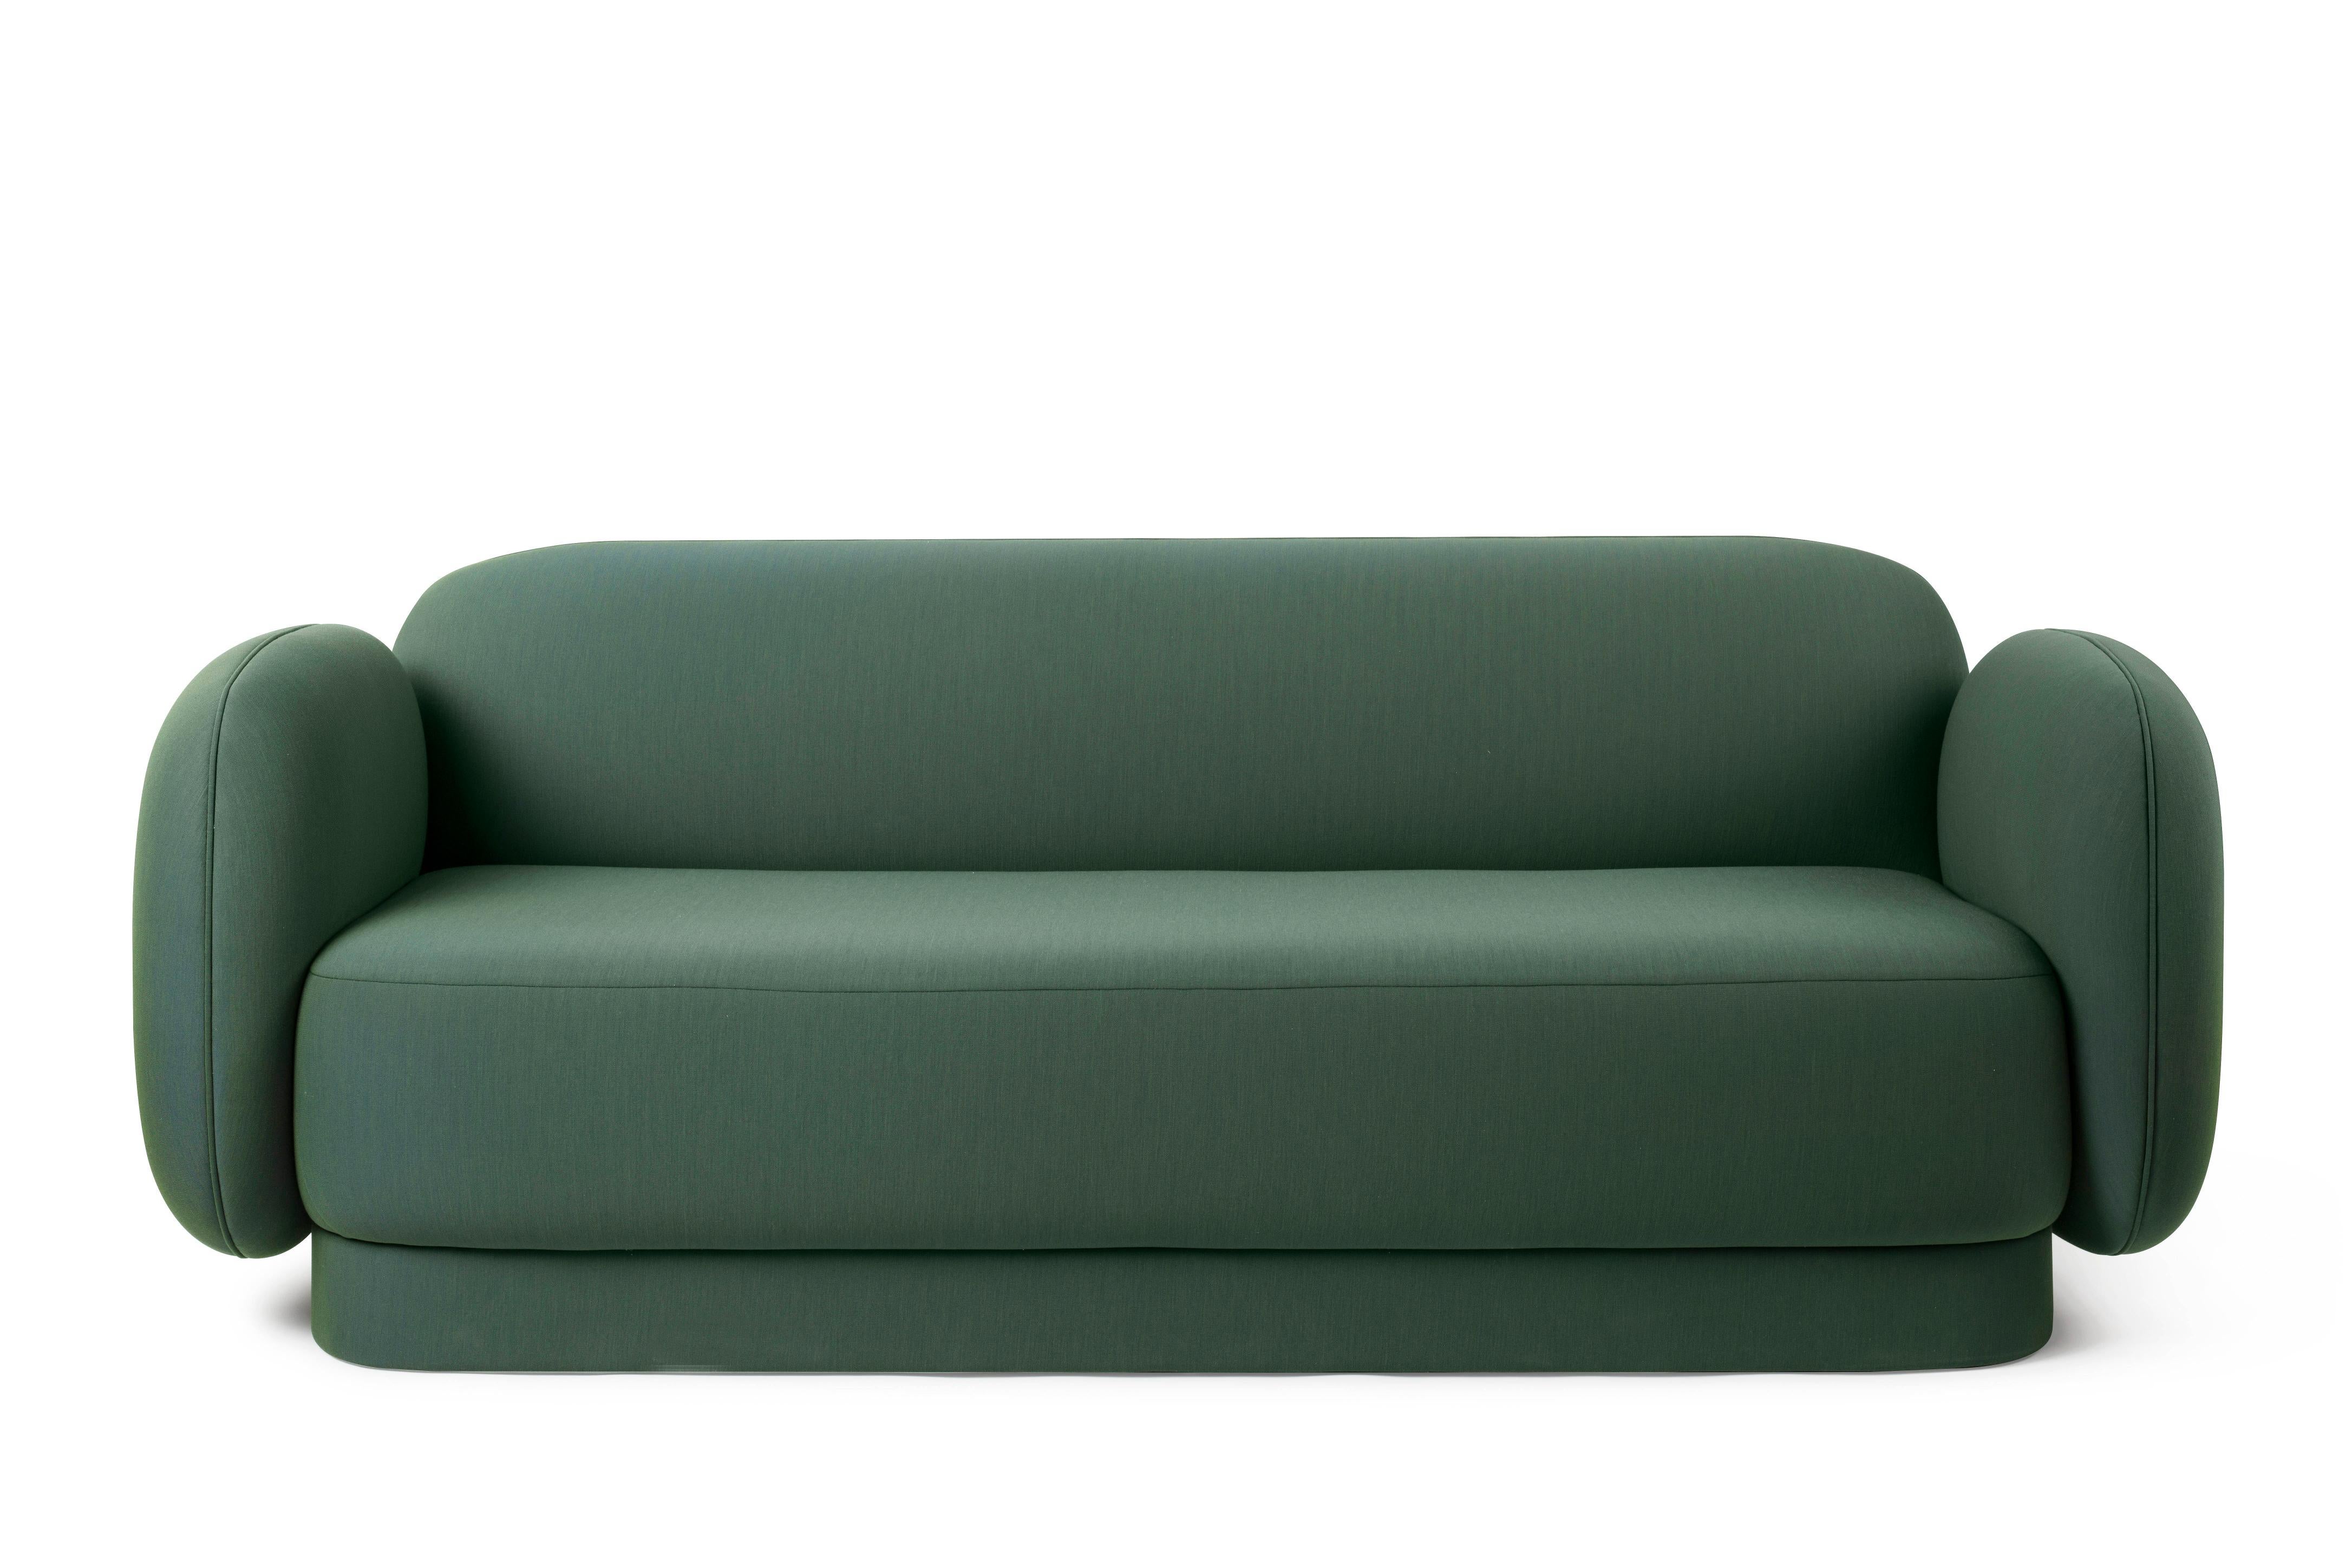 Space Oddity sofa designed by Thomas Dariel, Maison Dada
Sofa: L 240 x D 100 x H 95 cm
Structure in solid timber and plywood • Memory foam
Base and seating fully upholstered in fabric
Recommended fabric • Febrik Uniform Melange Collection from